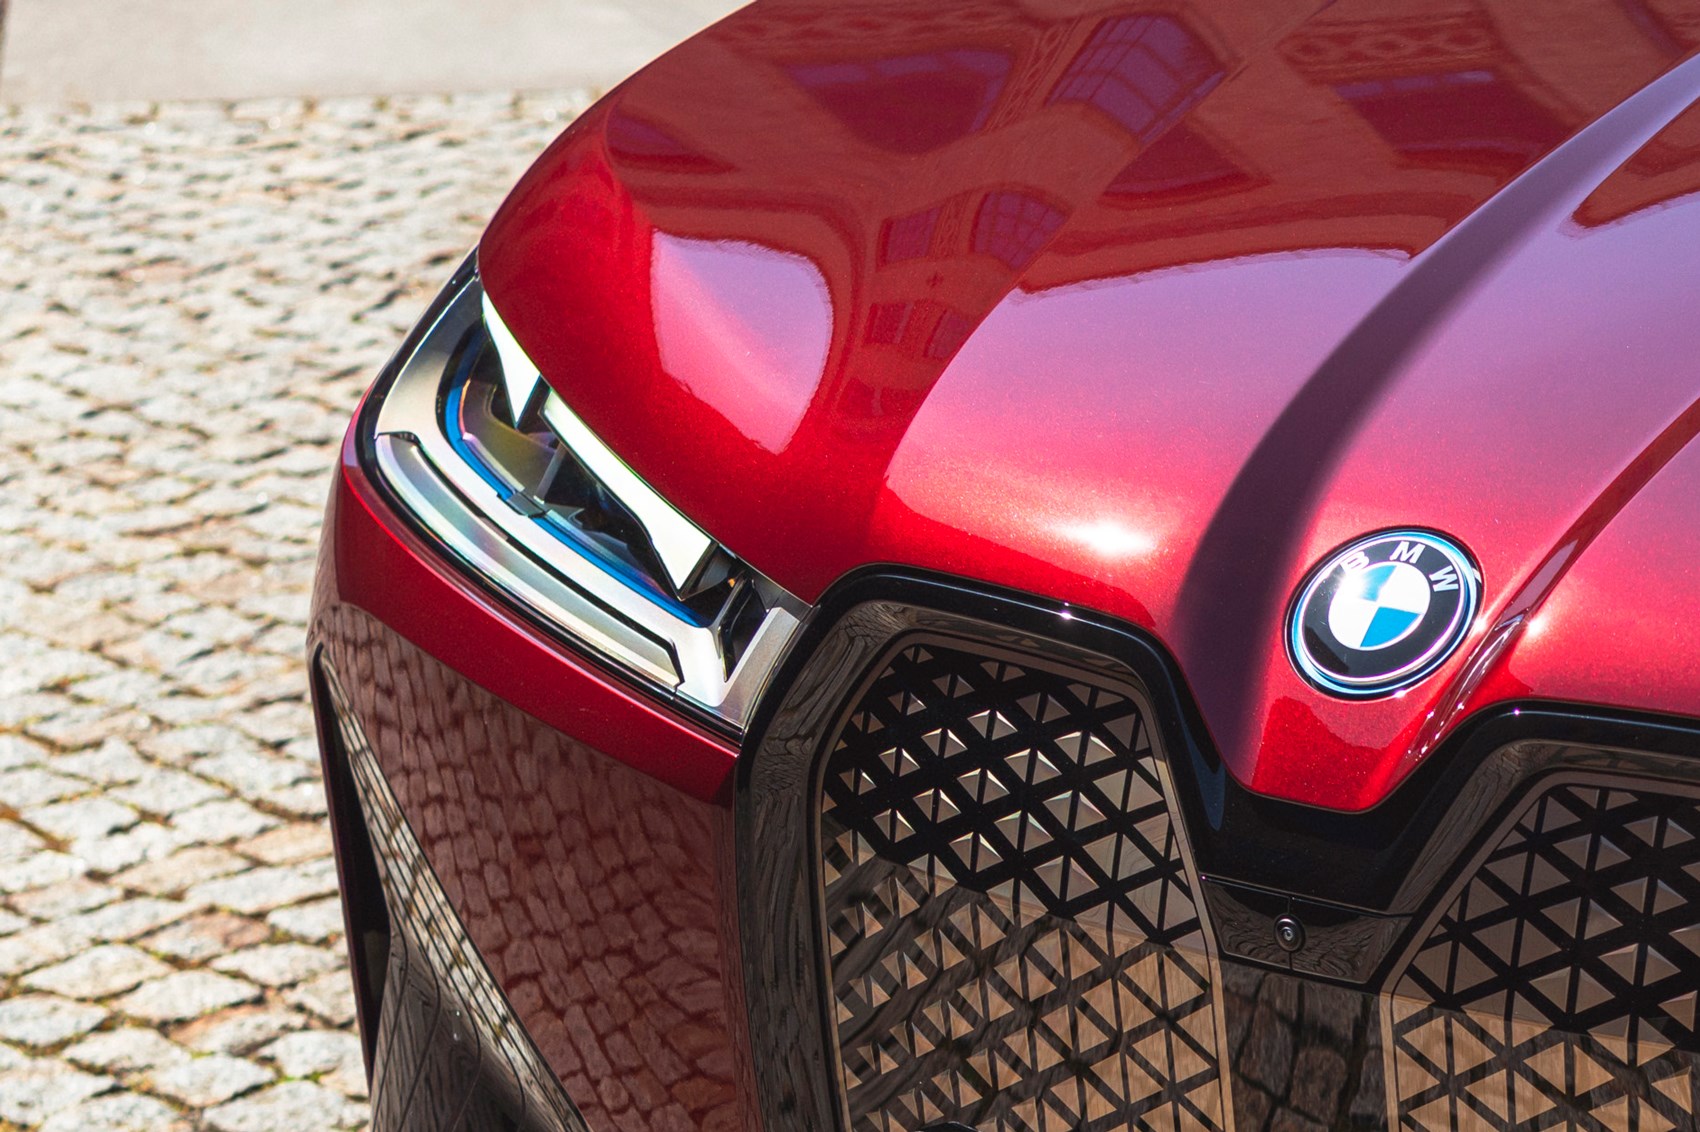 BMW Considering Even Larger Grilles for Future Cars - The Car Guide